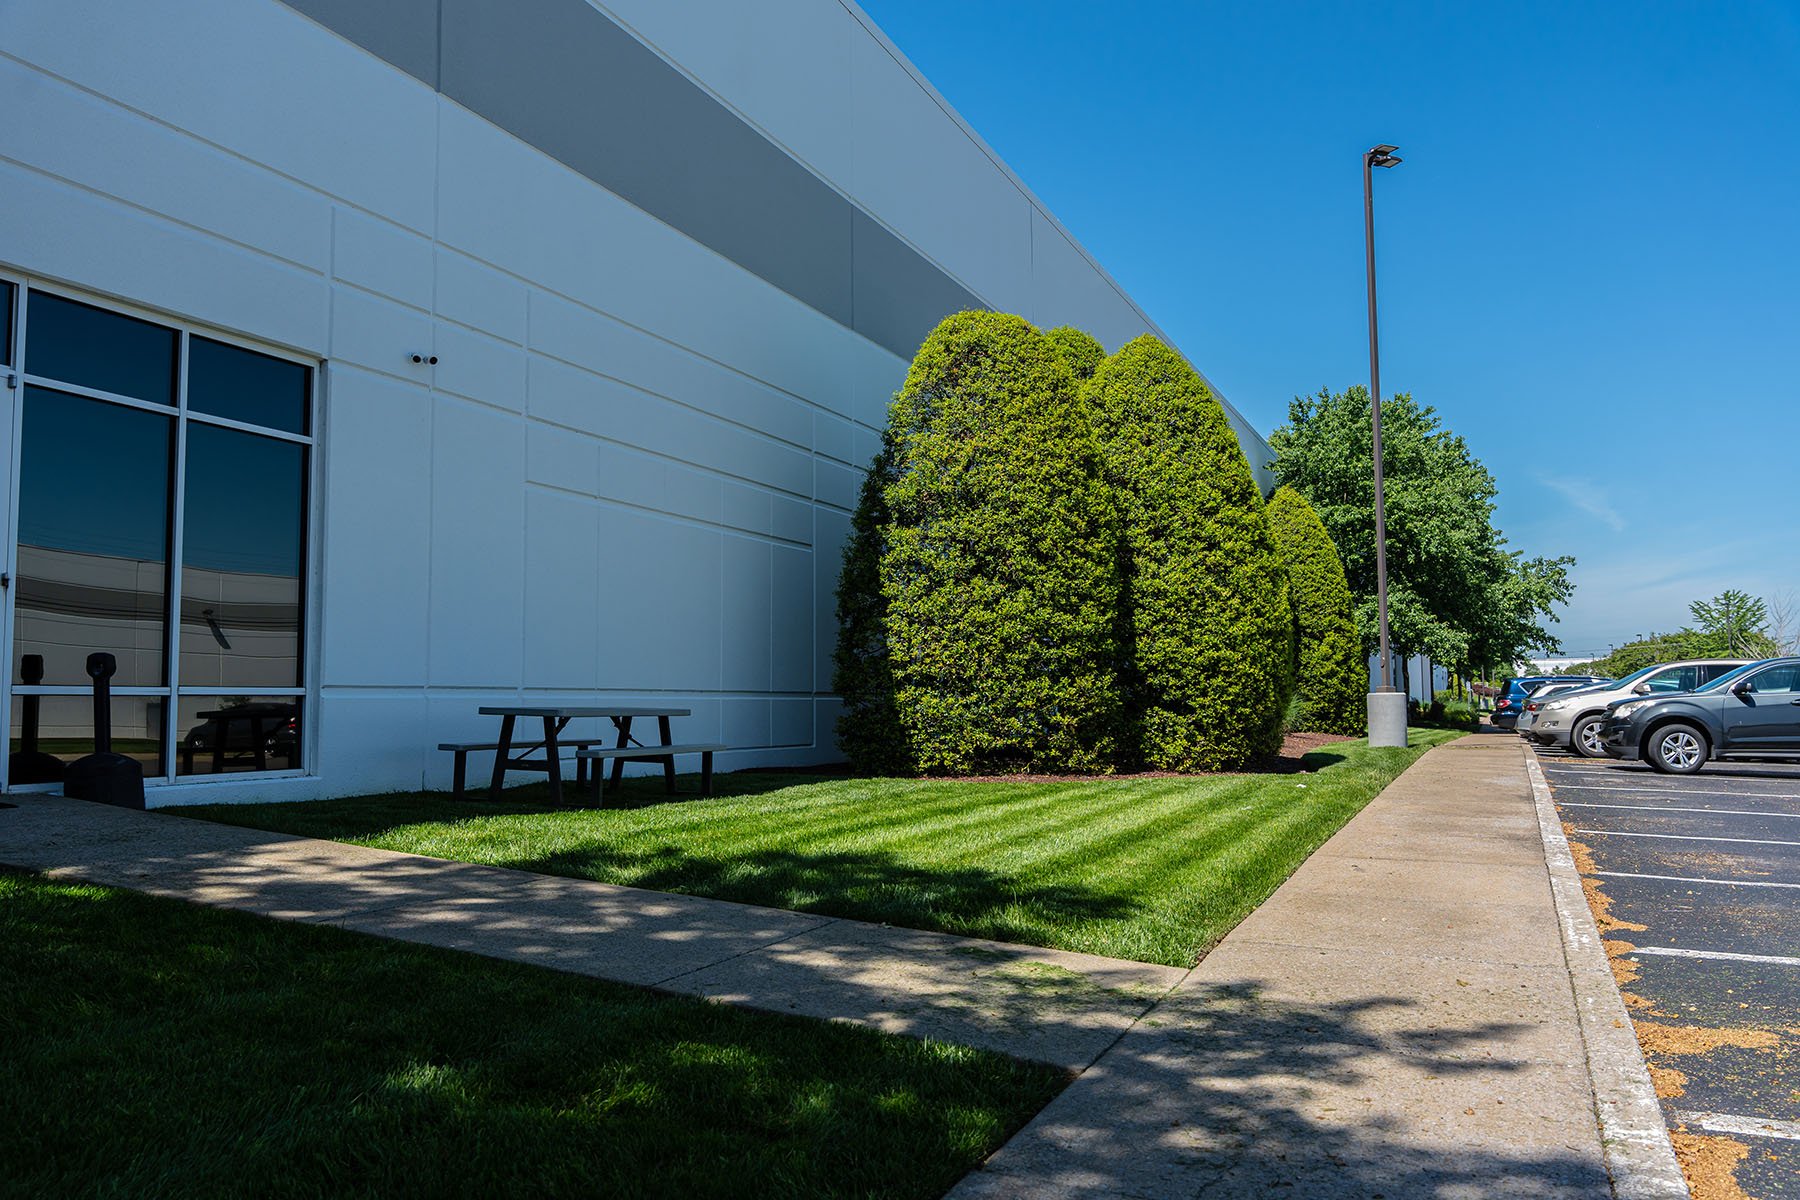 Example of Landscaping at a logisitics facility